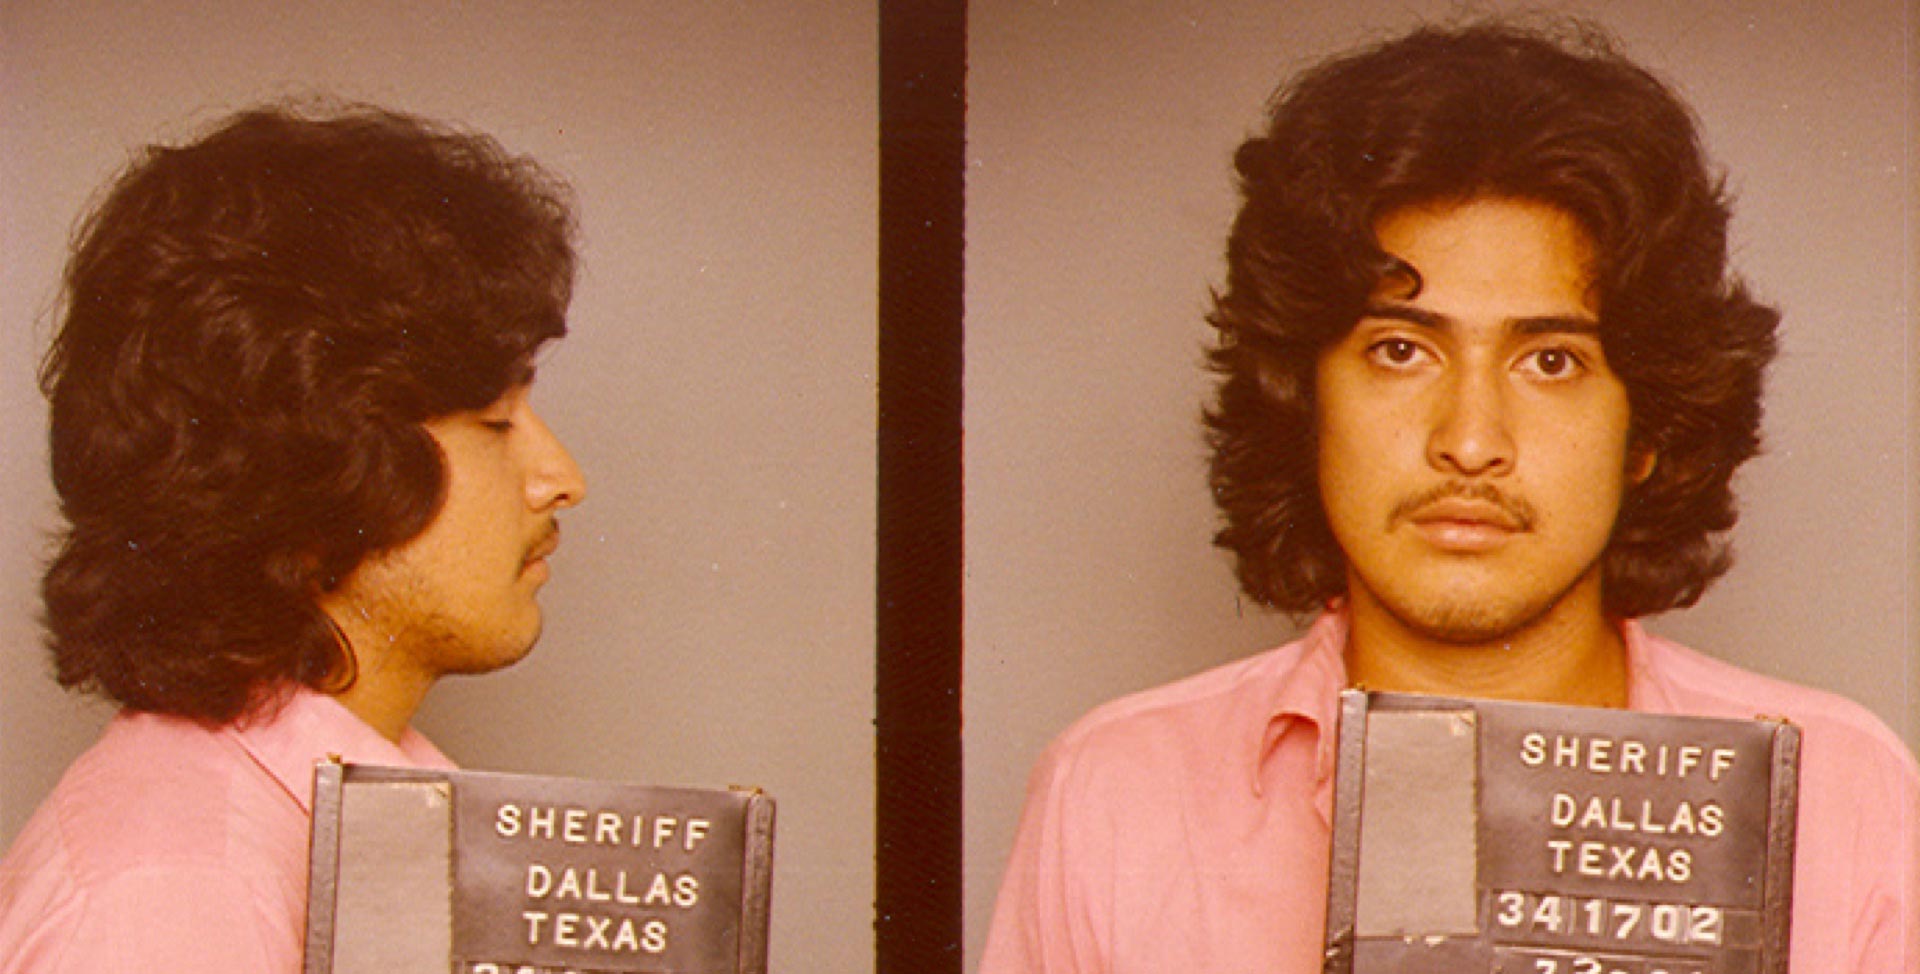 Carlos DeLuna was convicted of a 1983 murder based on eyewitness misidentification.